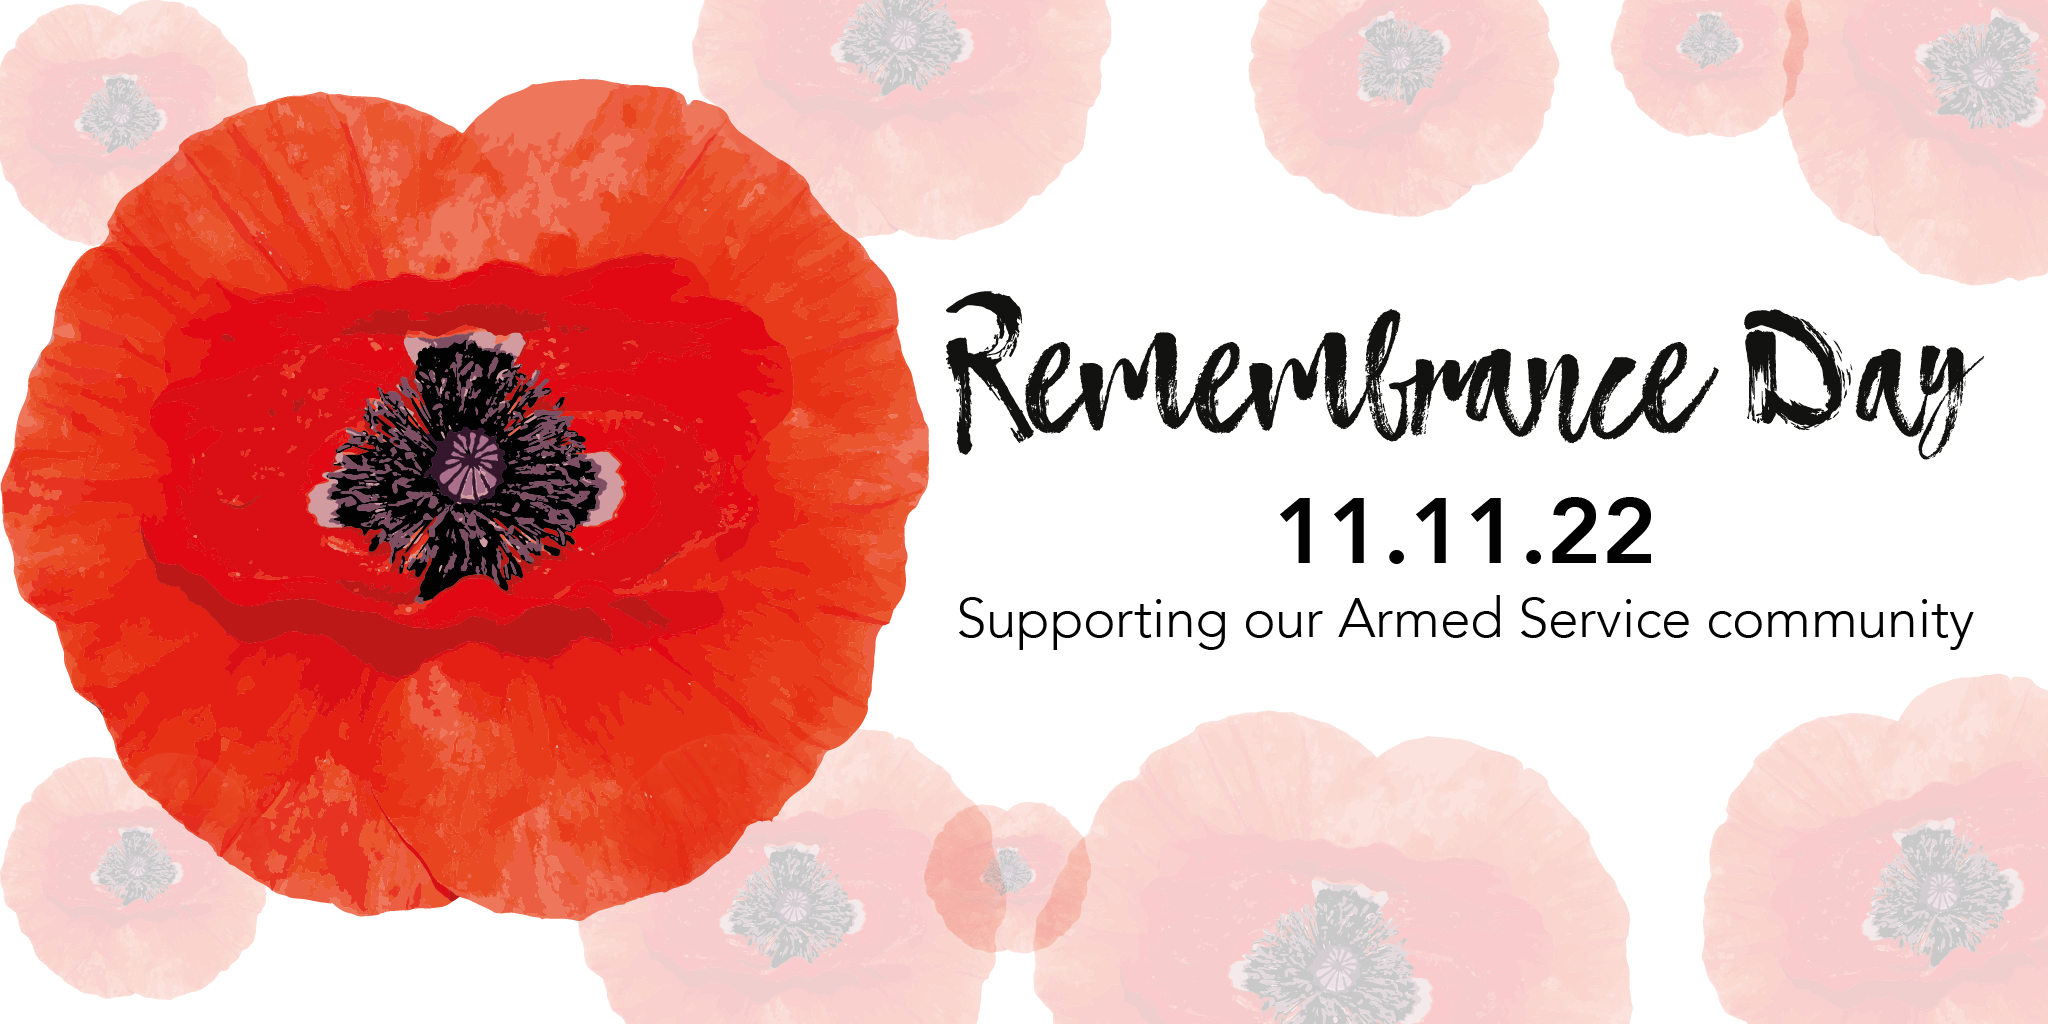 image of poppy and wording rembrance day